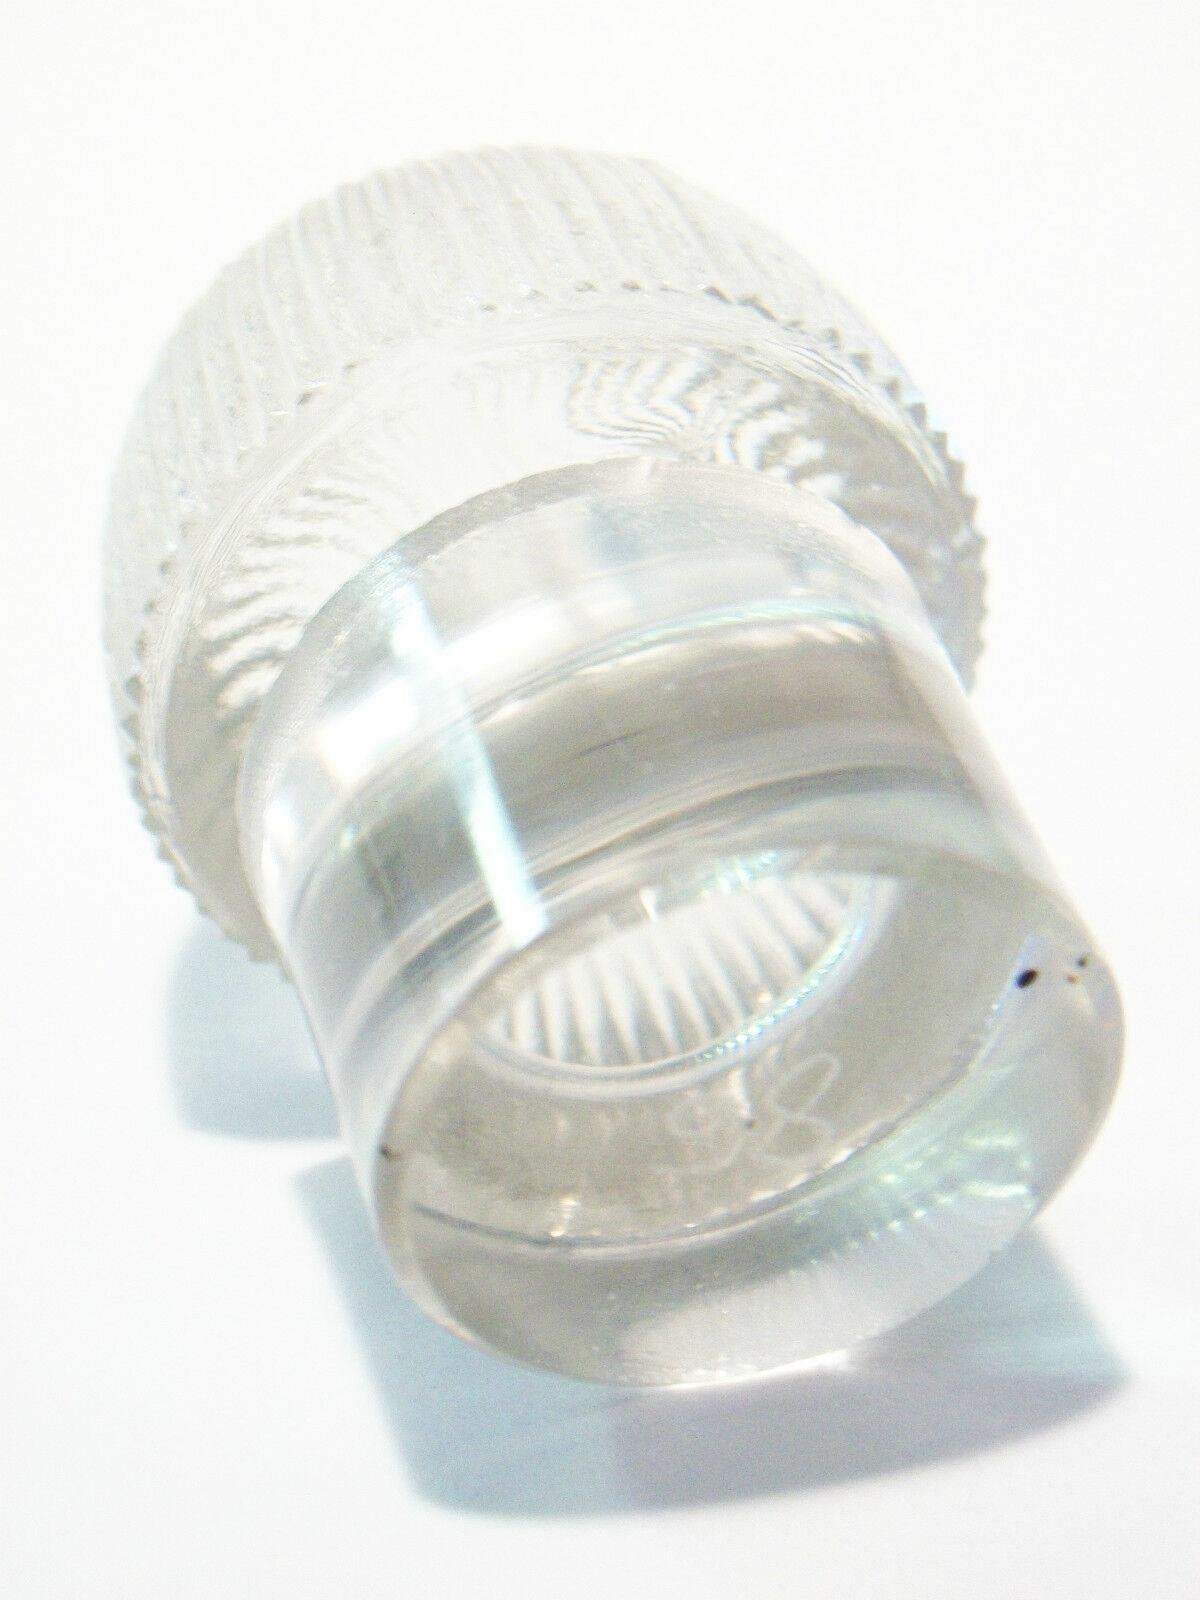 R. LALIQUE - Antique Stopper - Clear Glass - Mushroom Shape - Early 20th Century For Sale 1